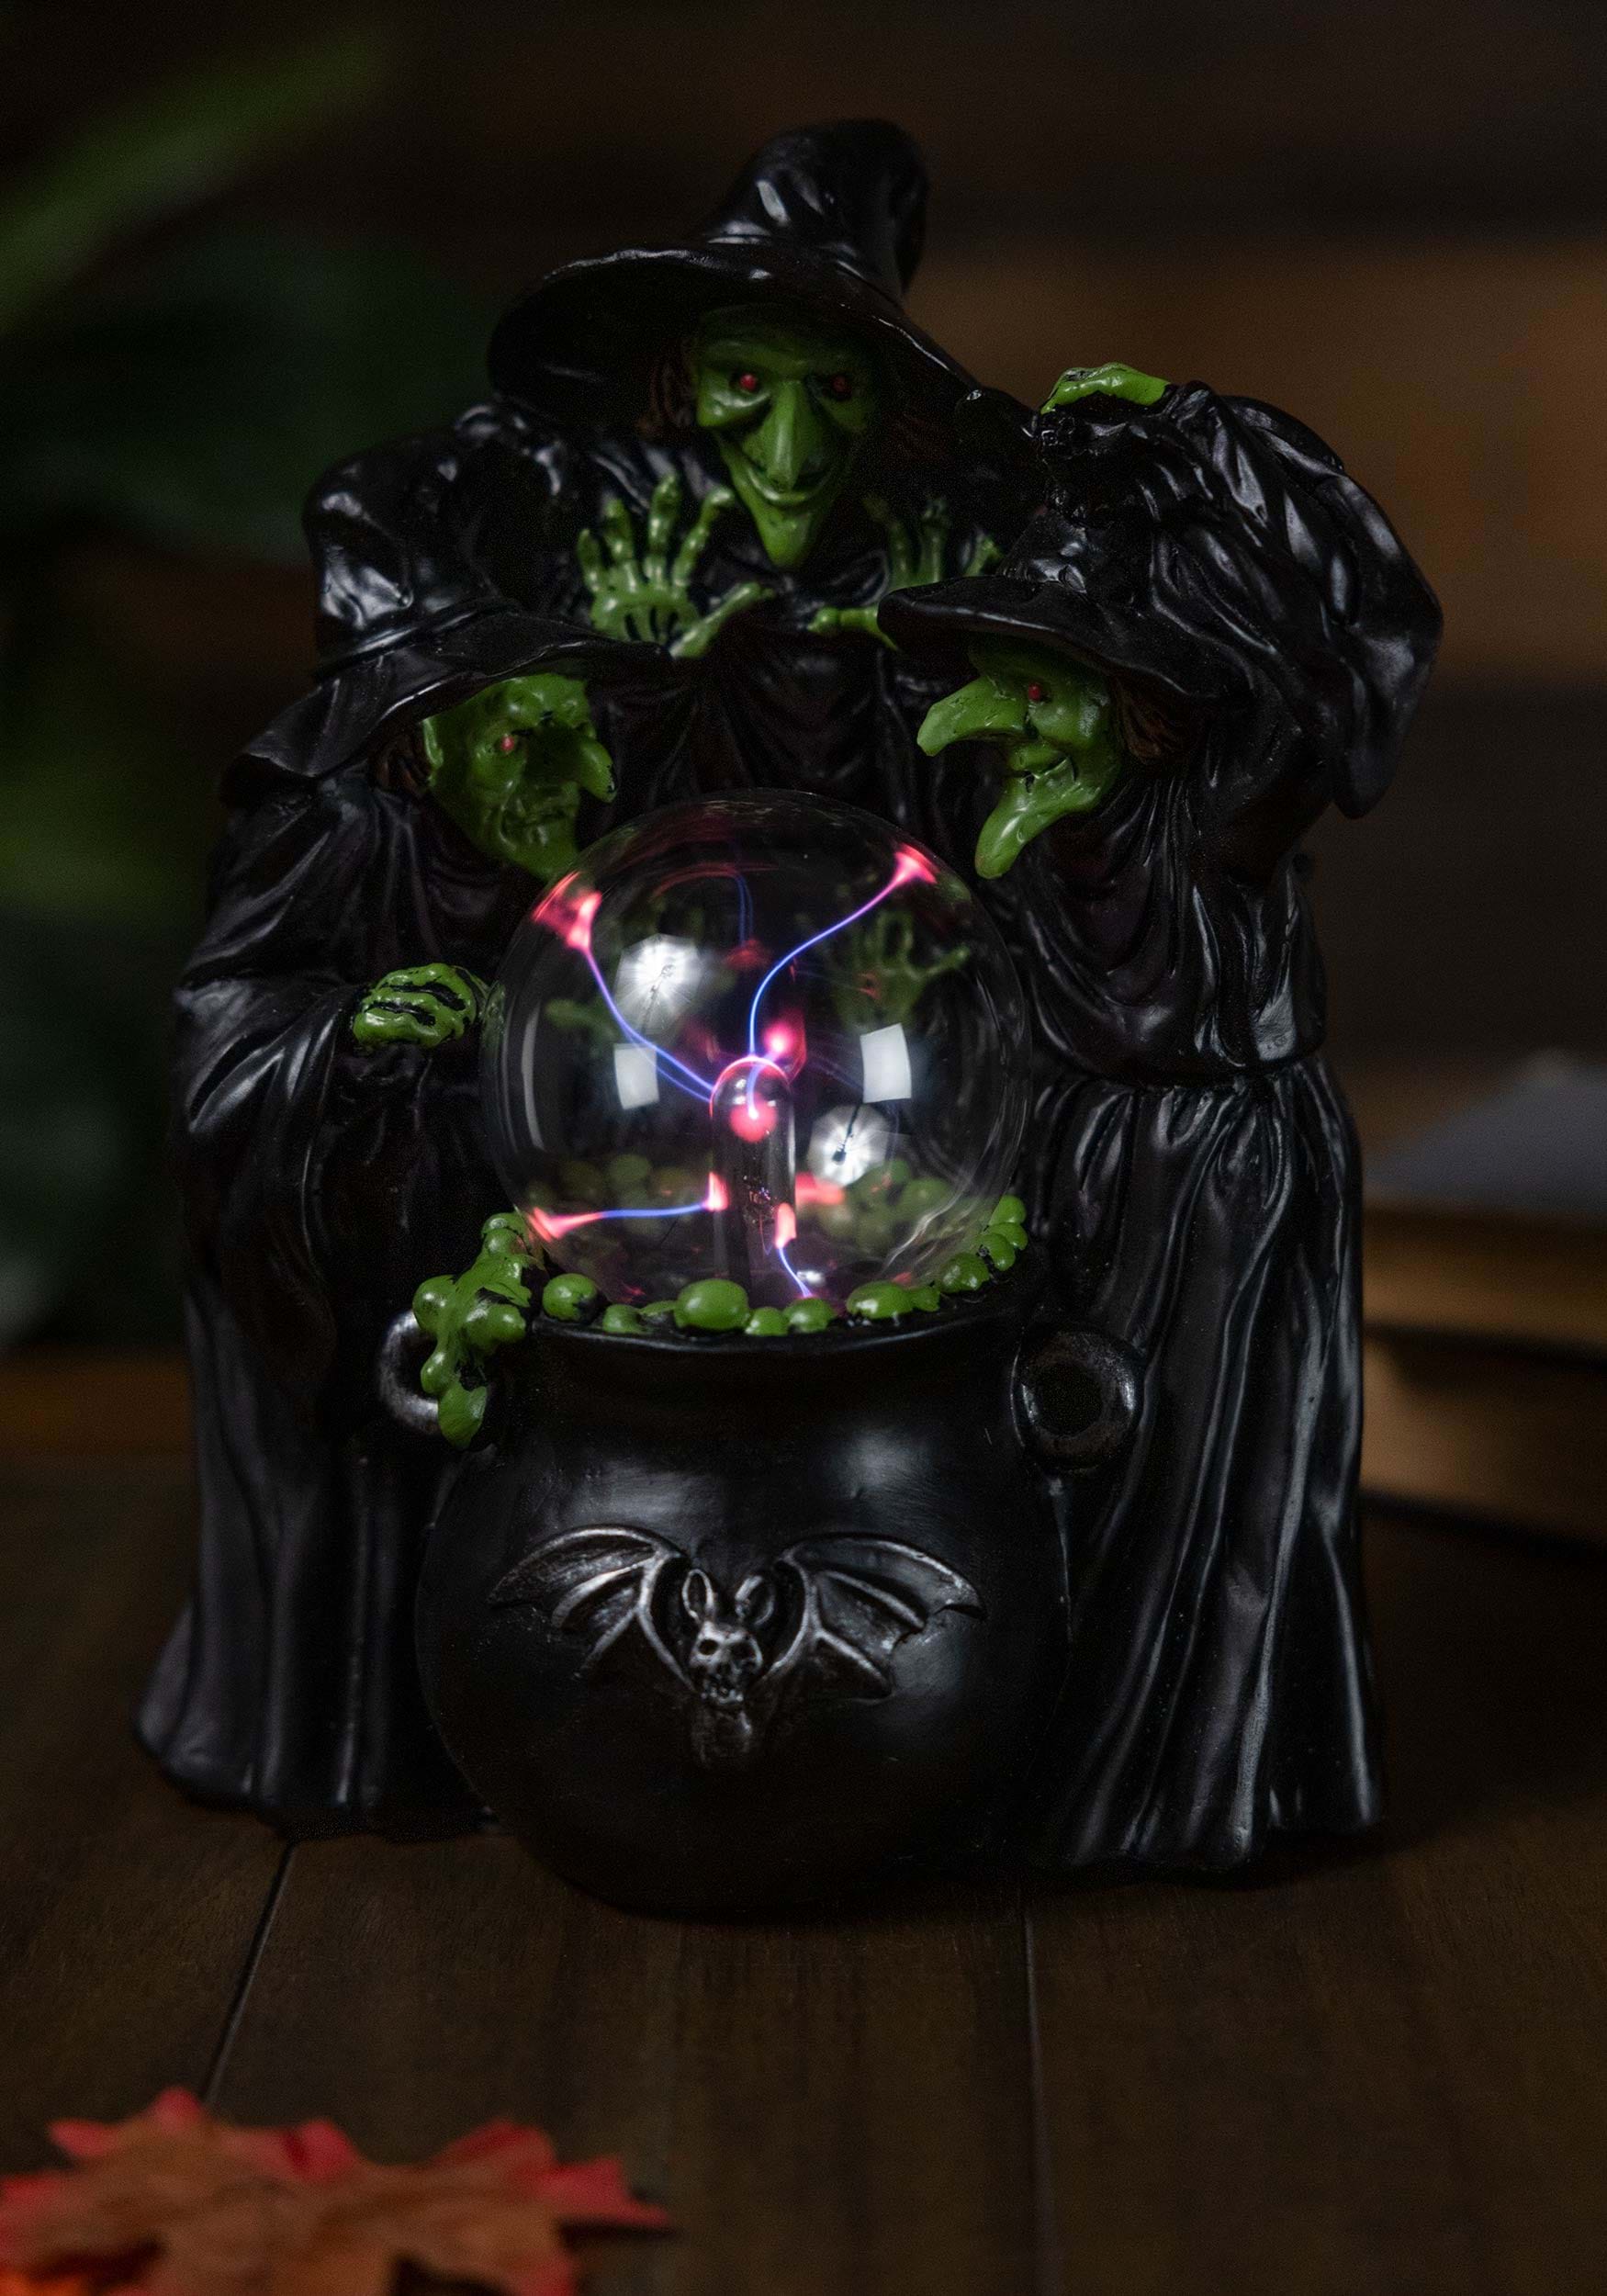 10" Cauldron and Witches with Static Lighted Magic Ball Prop